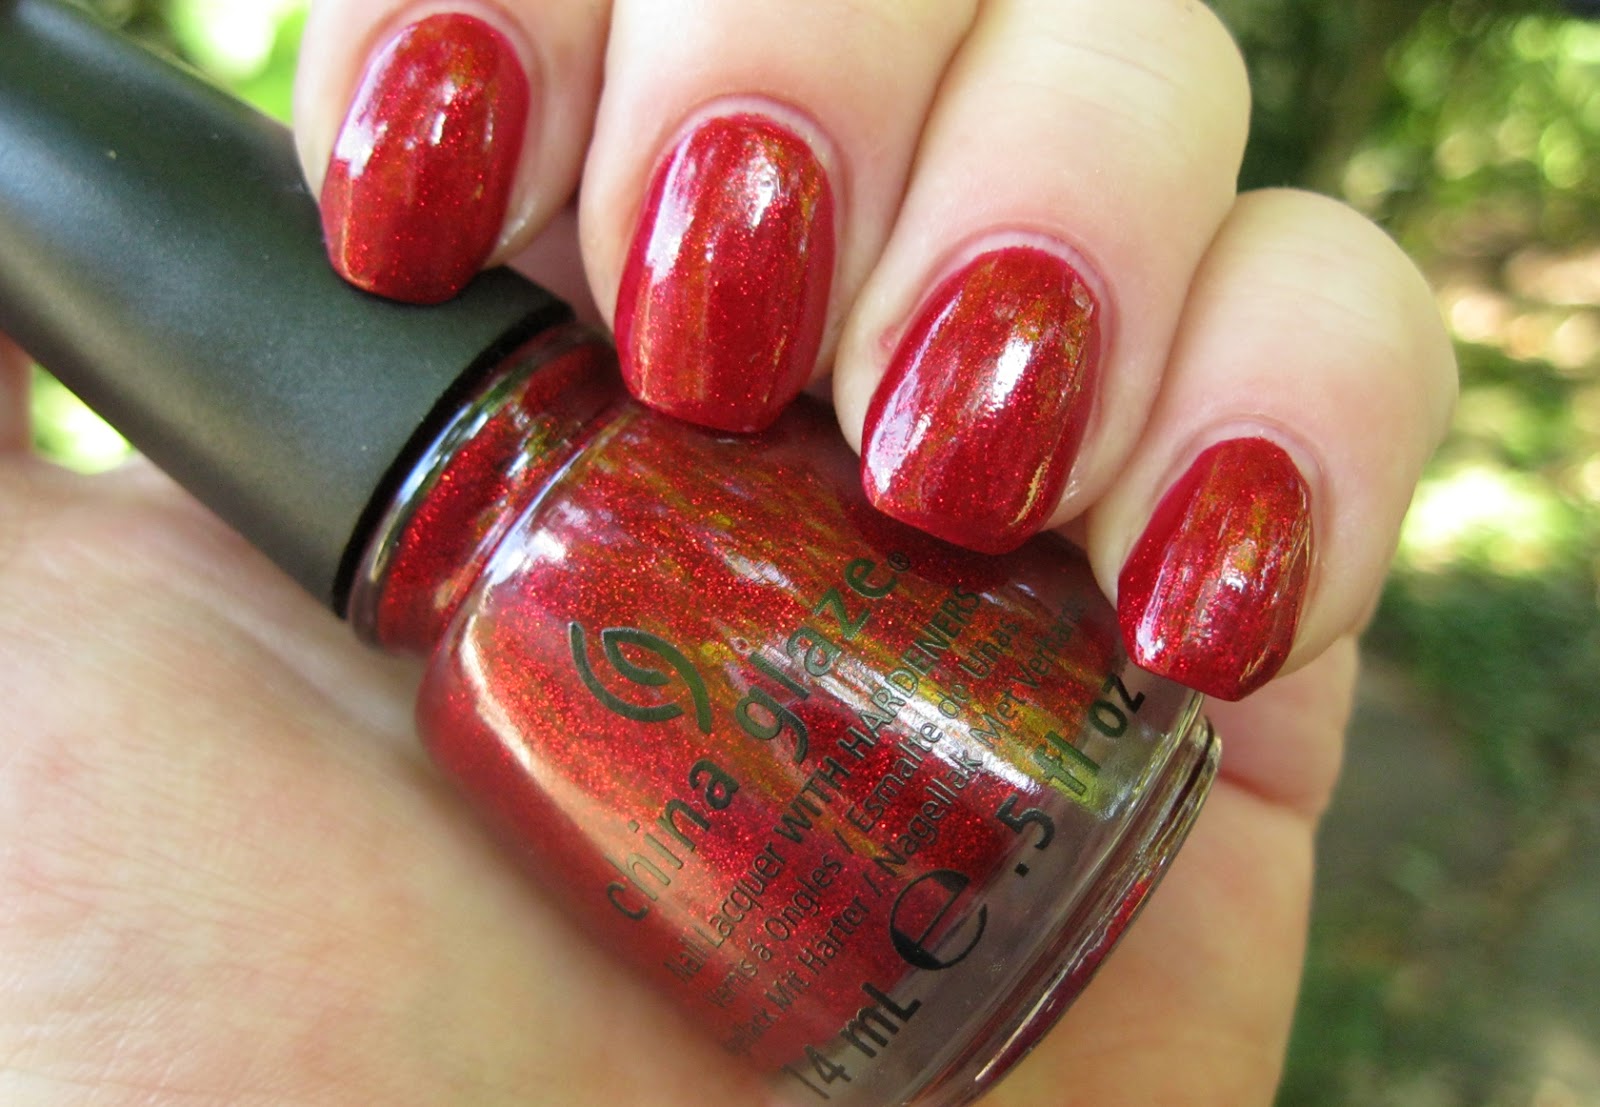 6. China Glaze Nail Lacquer in "Ruby Pumps" - wide 5